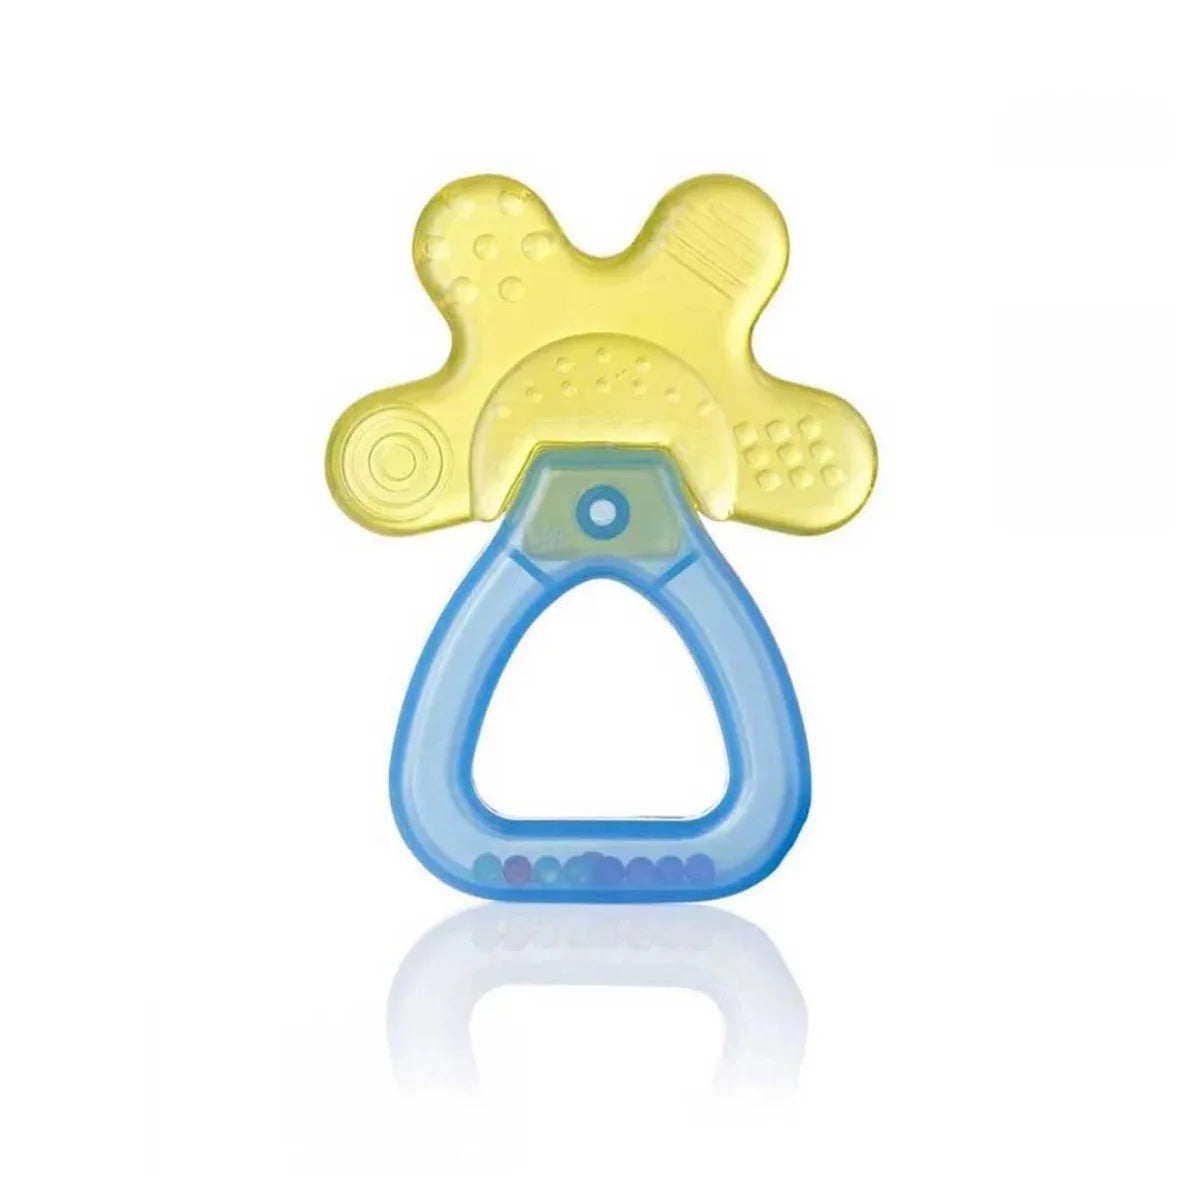 Blue and Yellow rattle and baby teether for babies